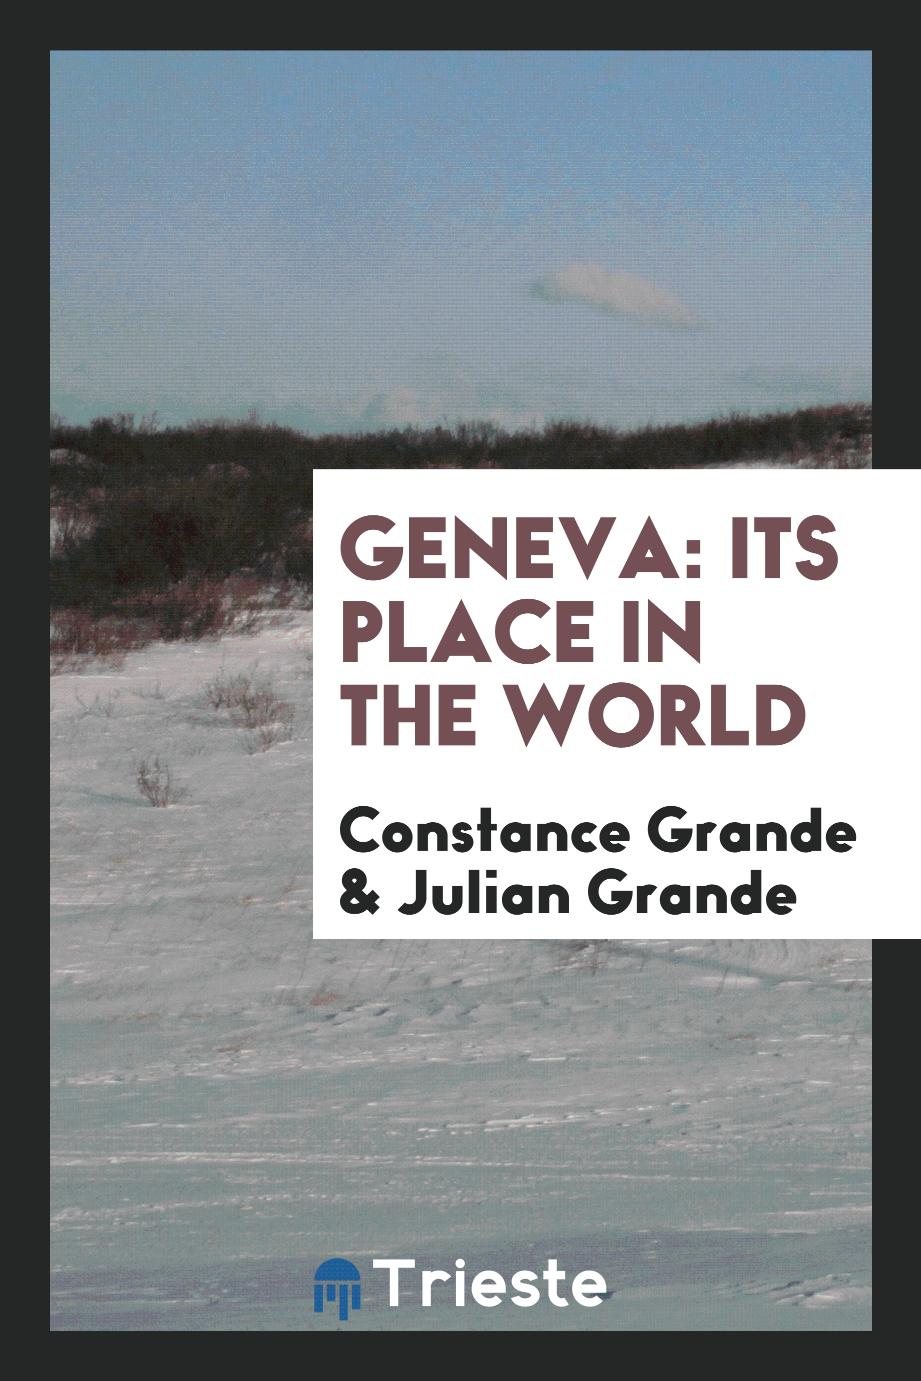 Geneva: its place in the world